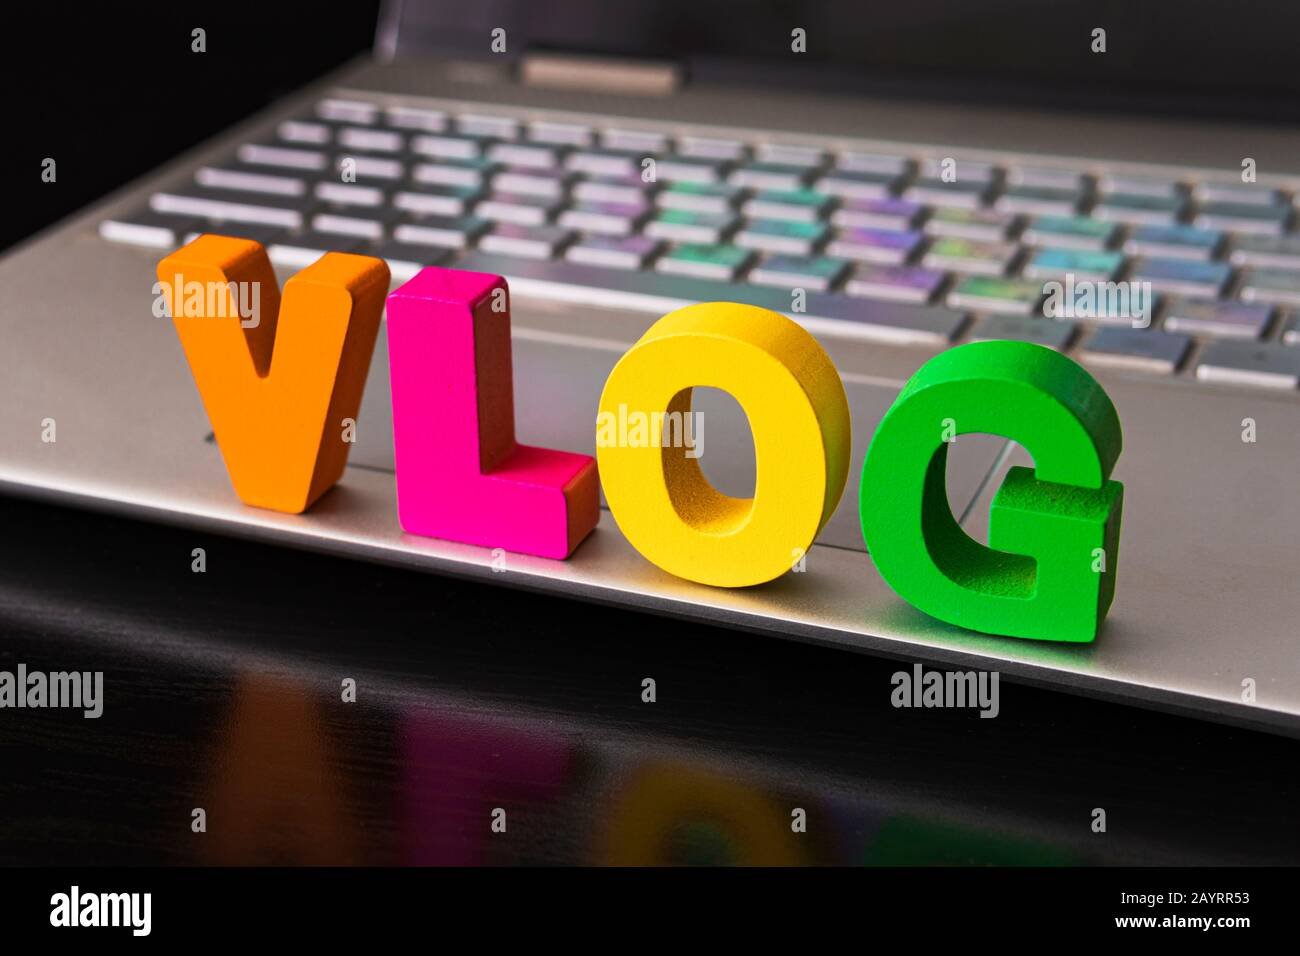 vlog-or-video-blog-concept-with-vlog-word-from-funny-letters-on-the-background-computer-keyboard-2AYRR53